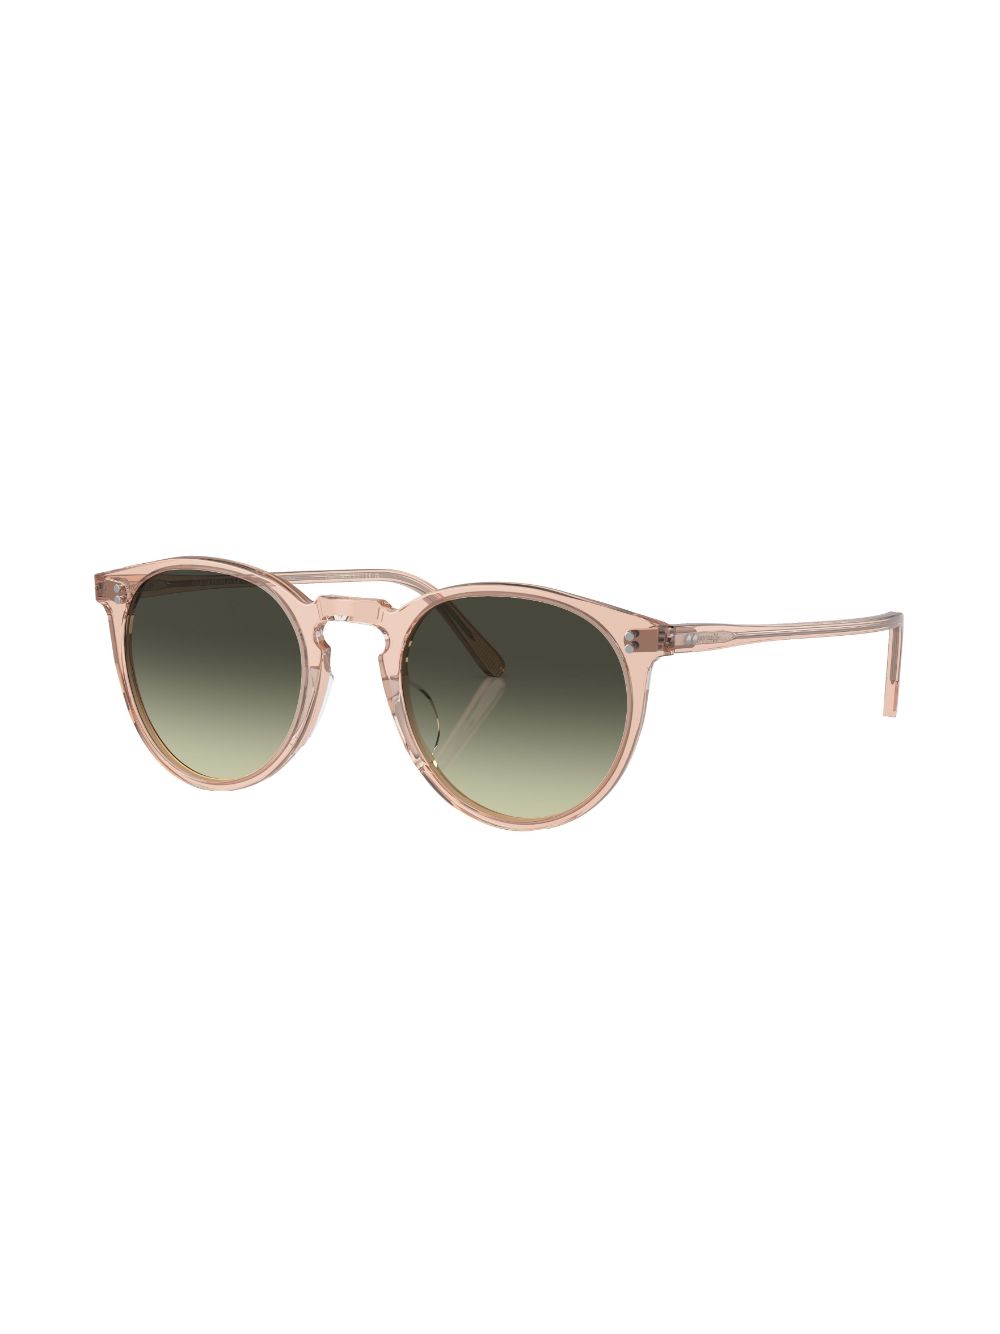 Oliver Peoples O'Malley zonnebril met rond montuur - 1758BH Champagne Quartz